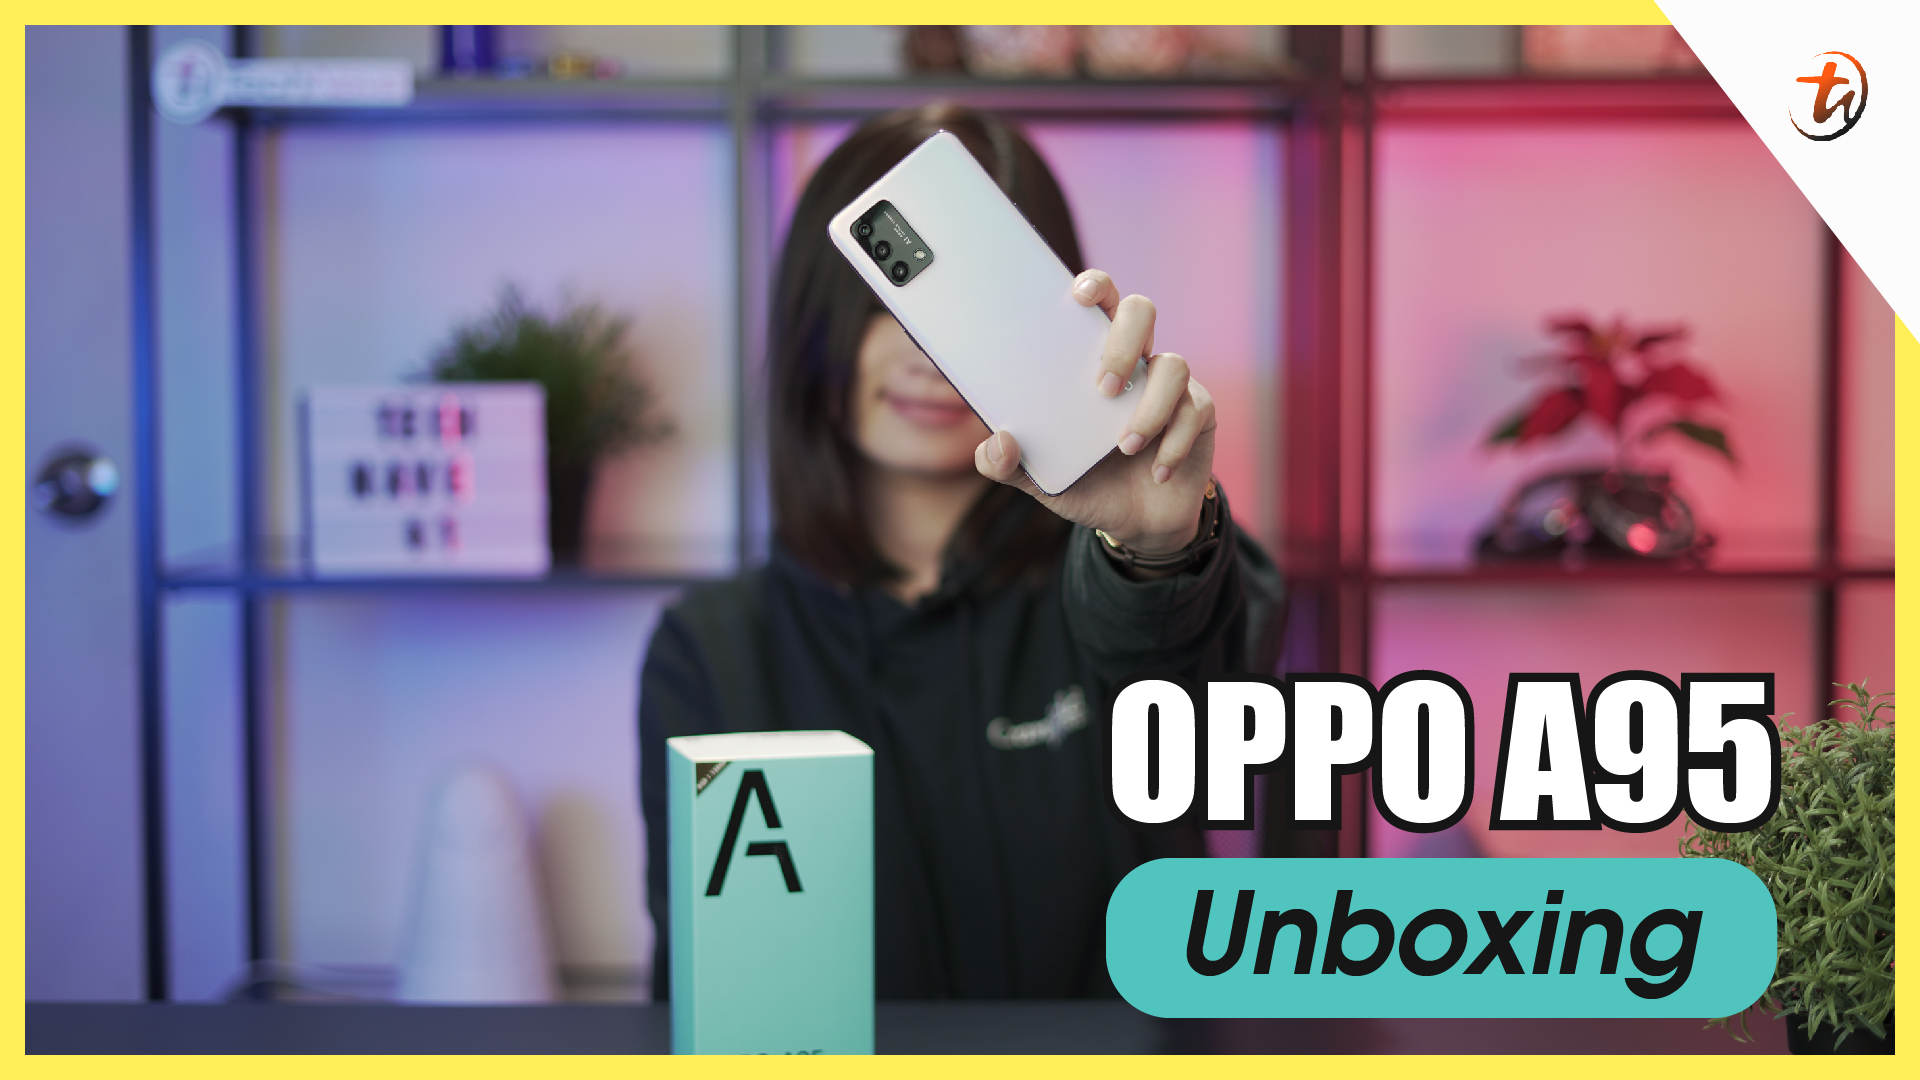 OPPO A95 - Worth getting it? | TechNave Unboxing and Hands-On Video